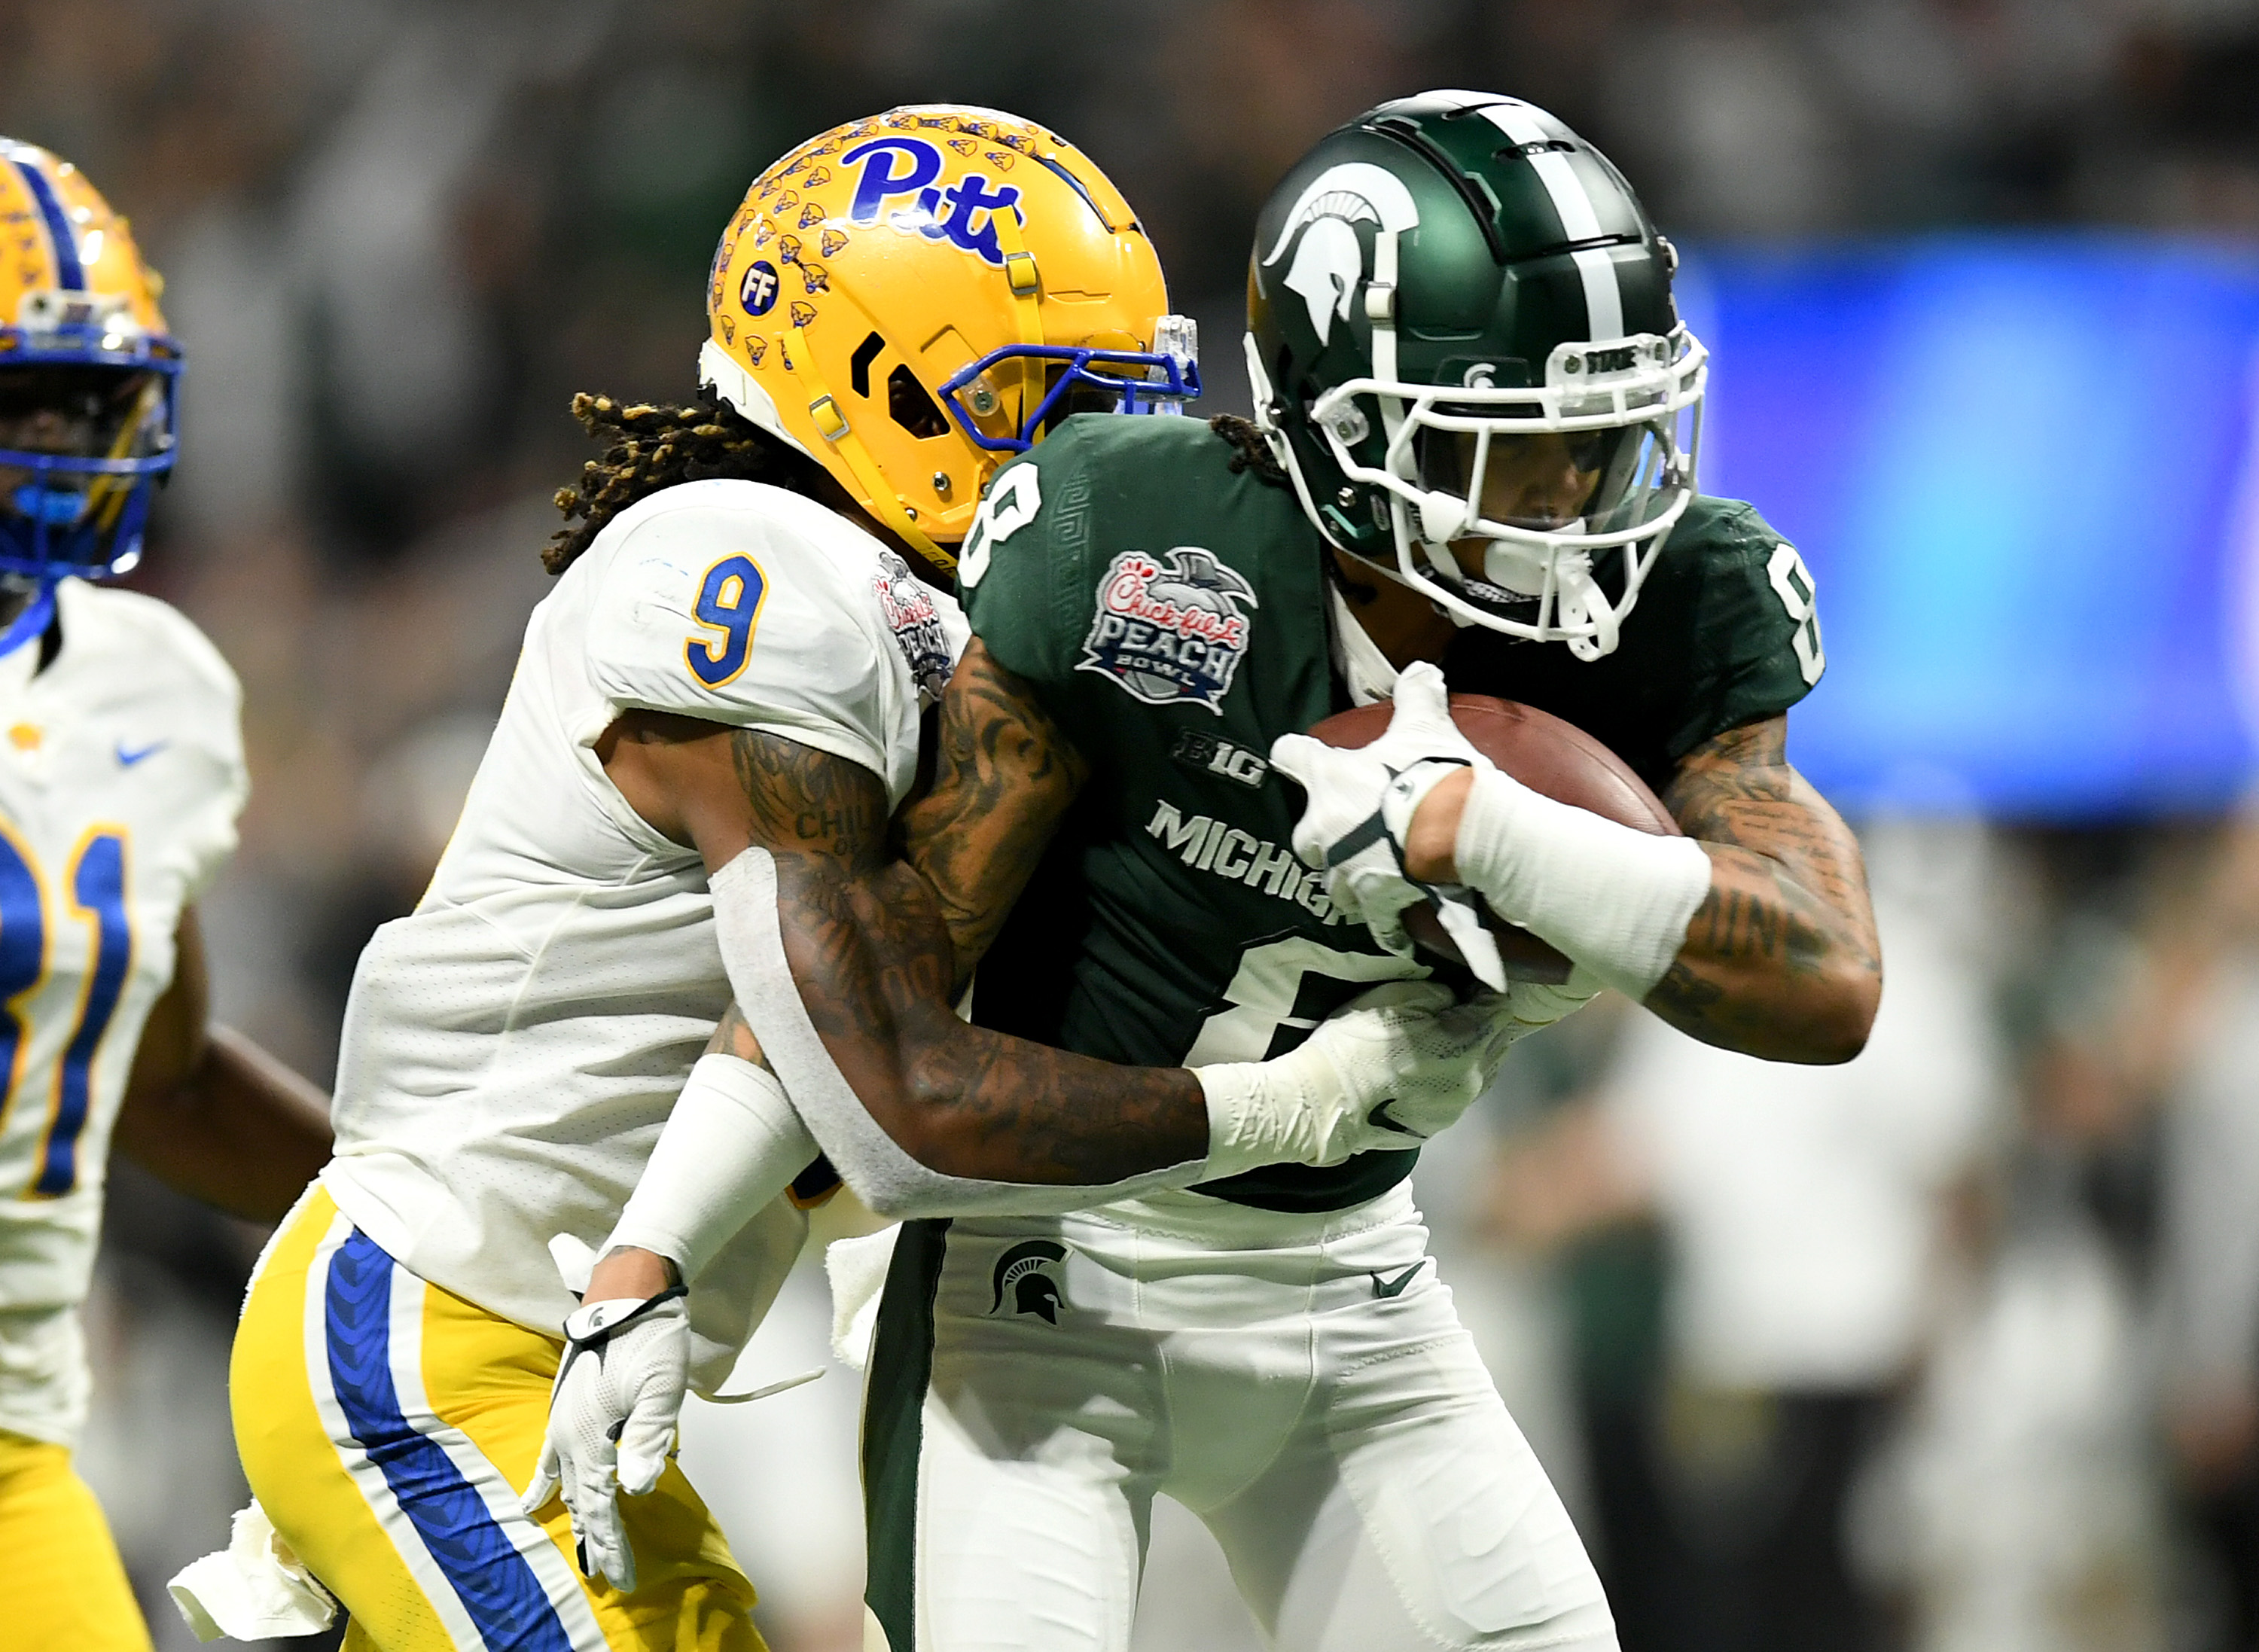 Michigan State 2022 Schedule Here Is Michigan State Football's New 2022 Schedule, With Michigan Game In  Ann Arbor